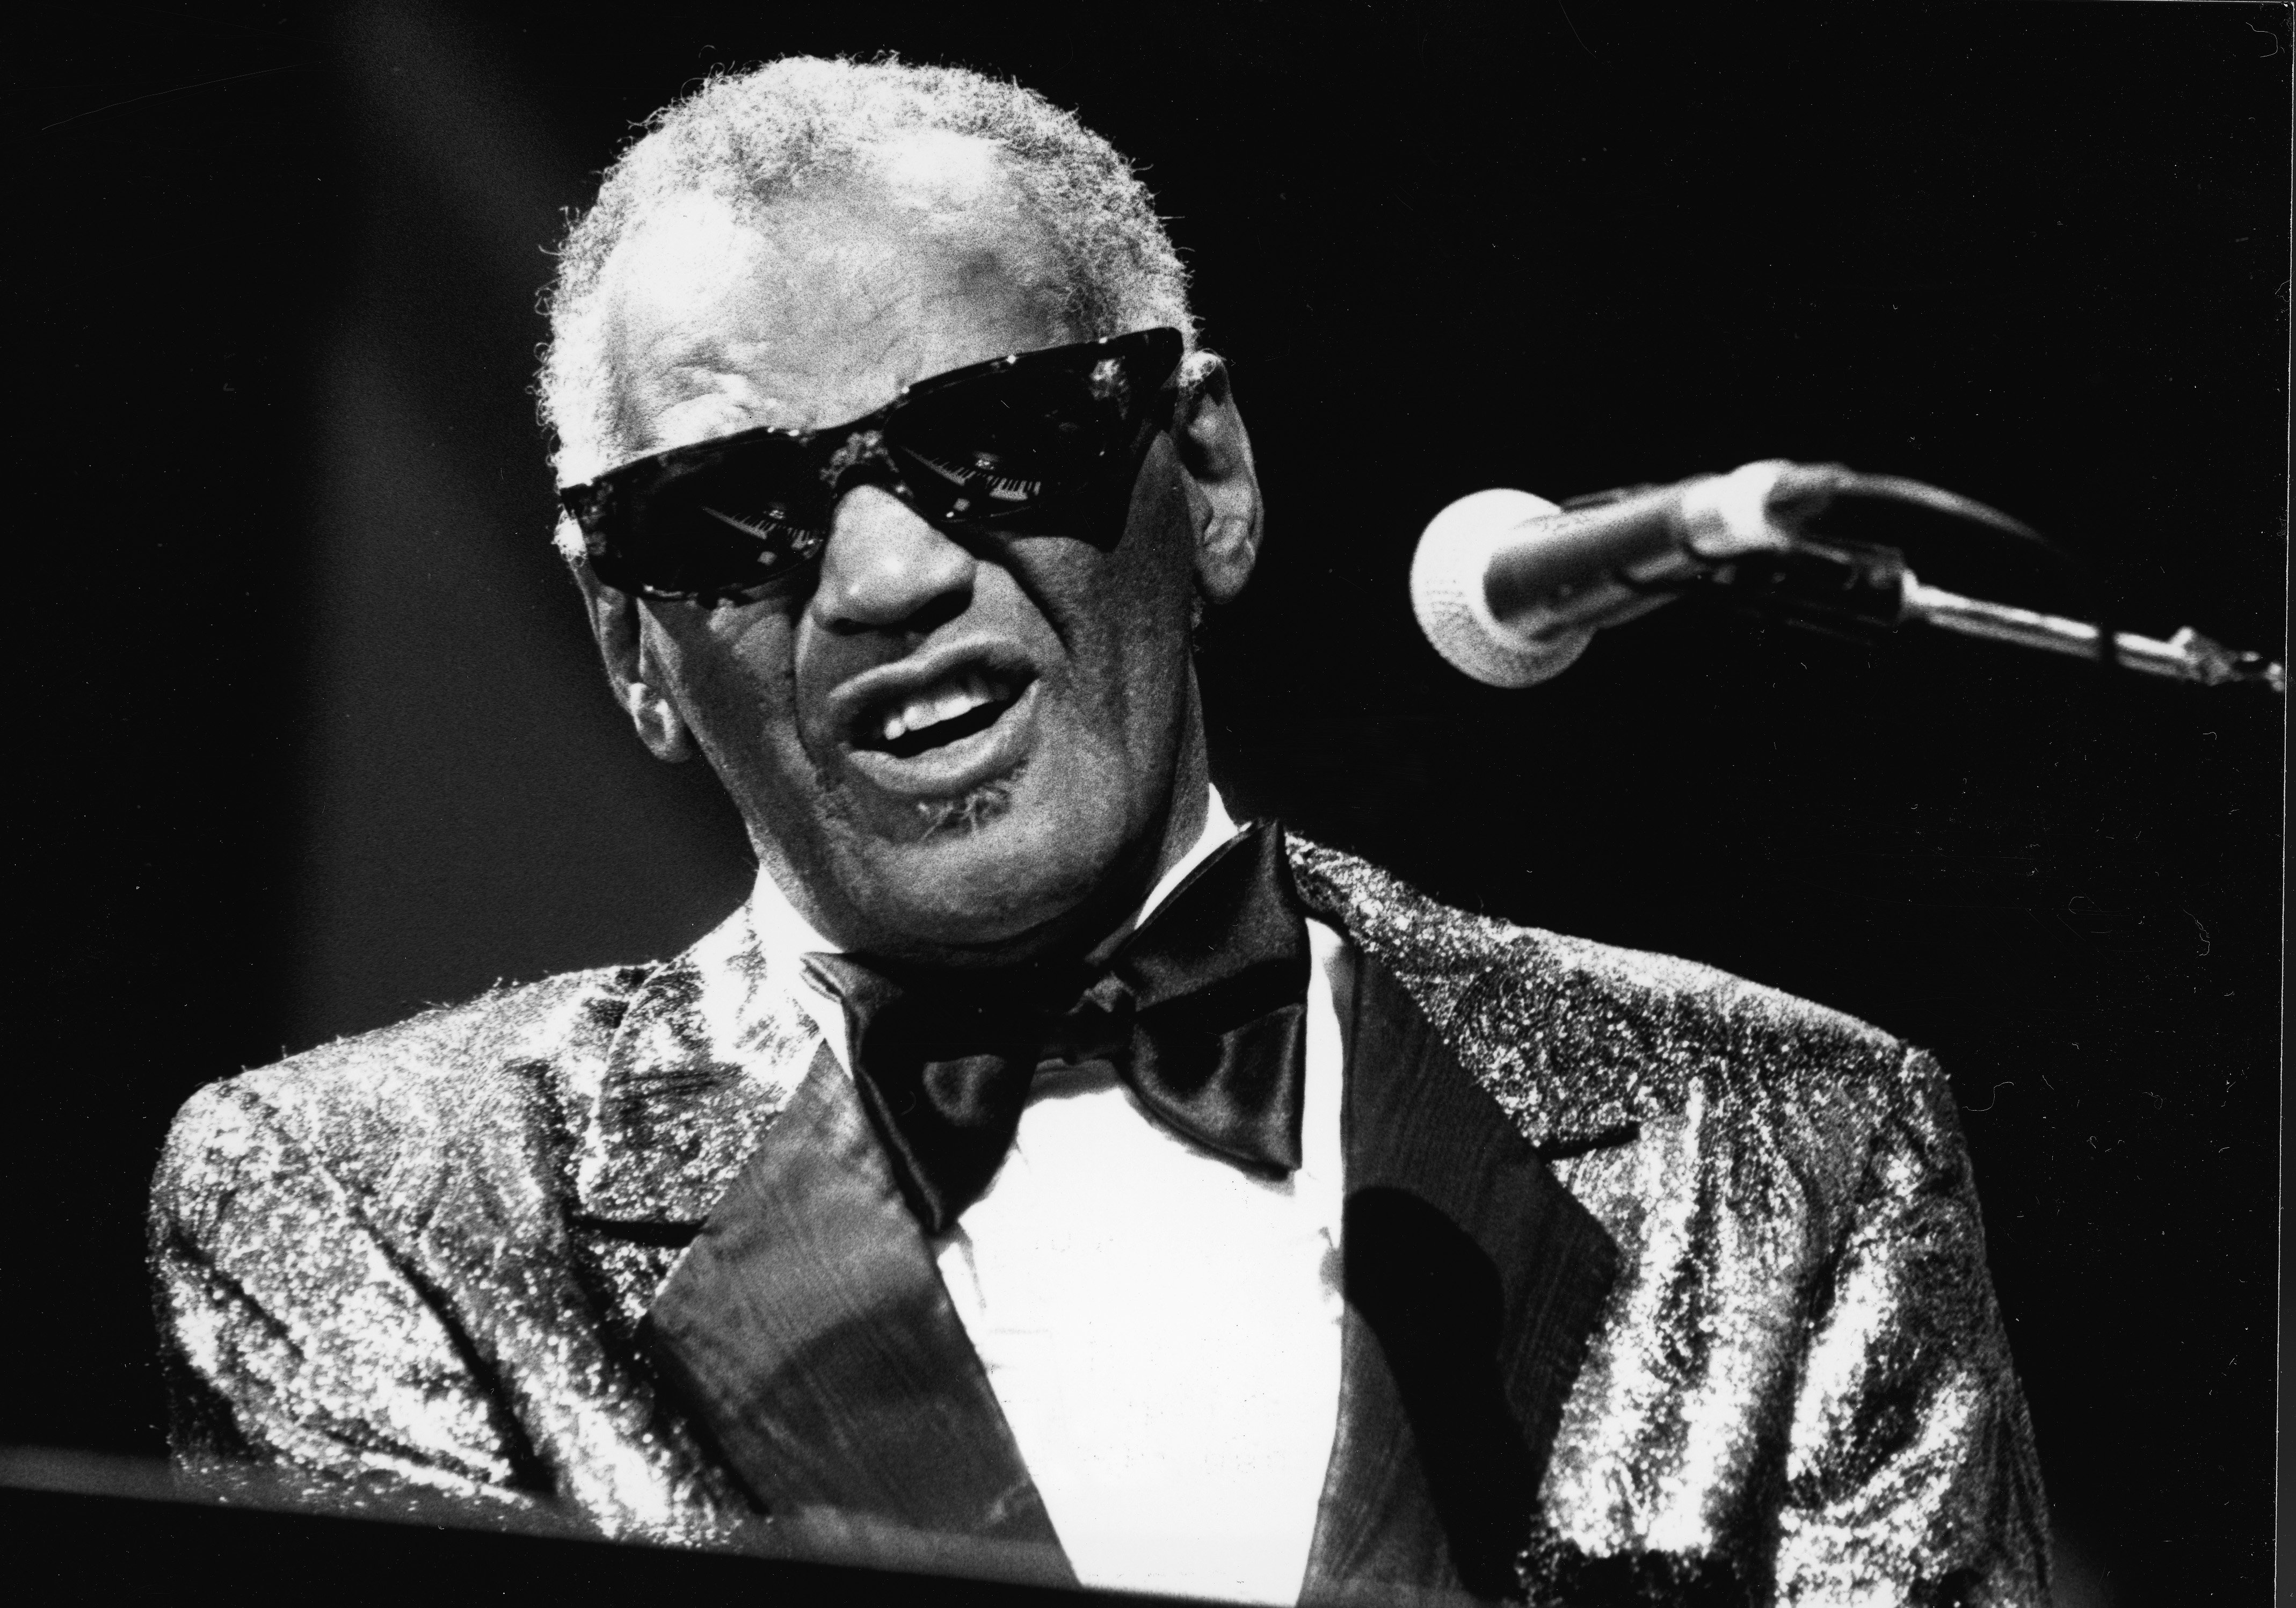 American singer, pianist and songwriter Ray Charles performs in concert, 1980s. | Photo by Hulton Archive/Getty Images